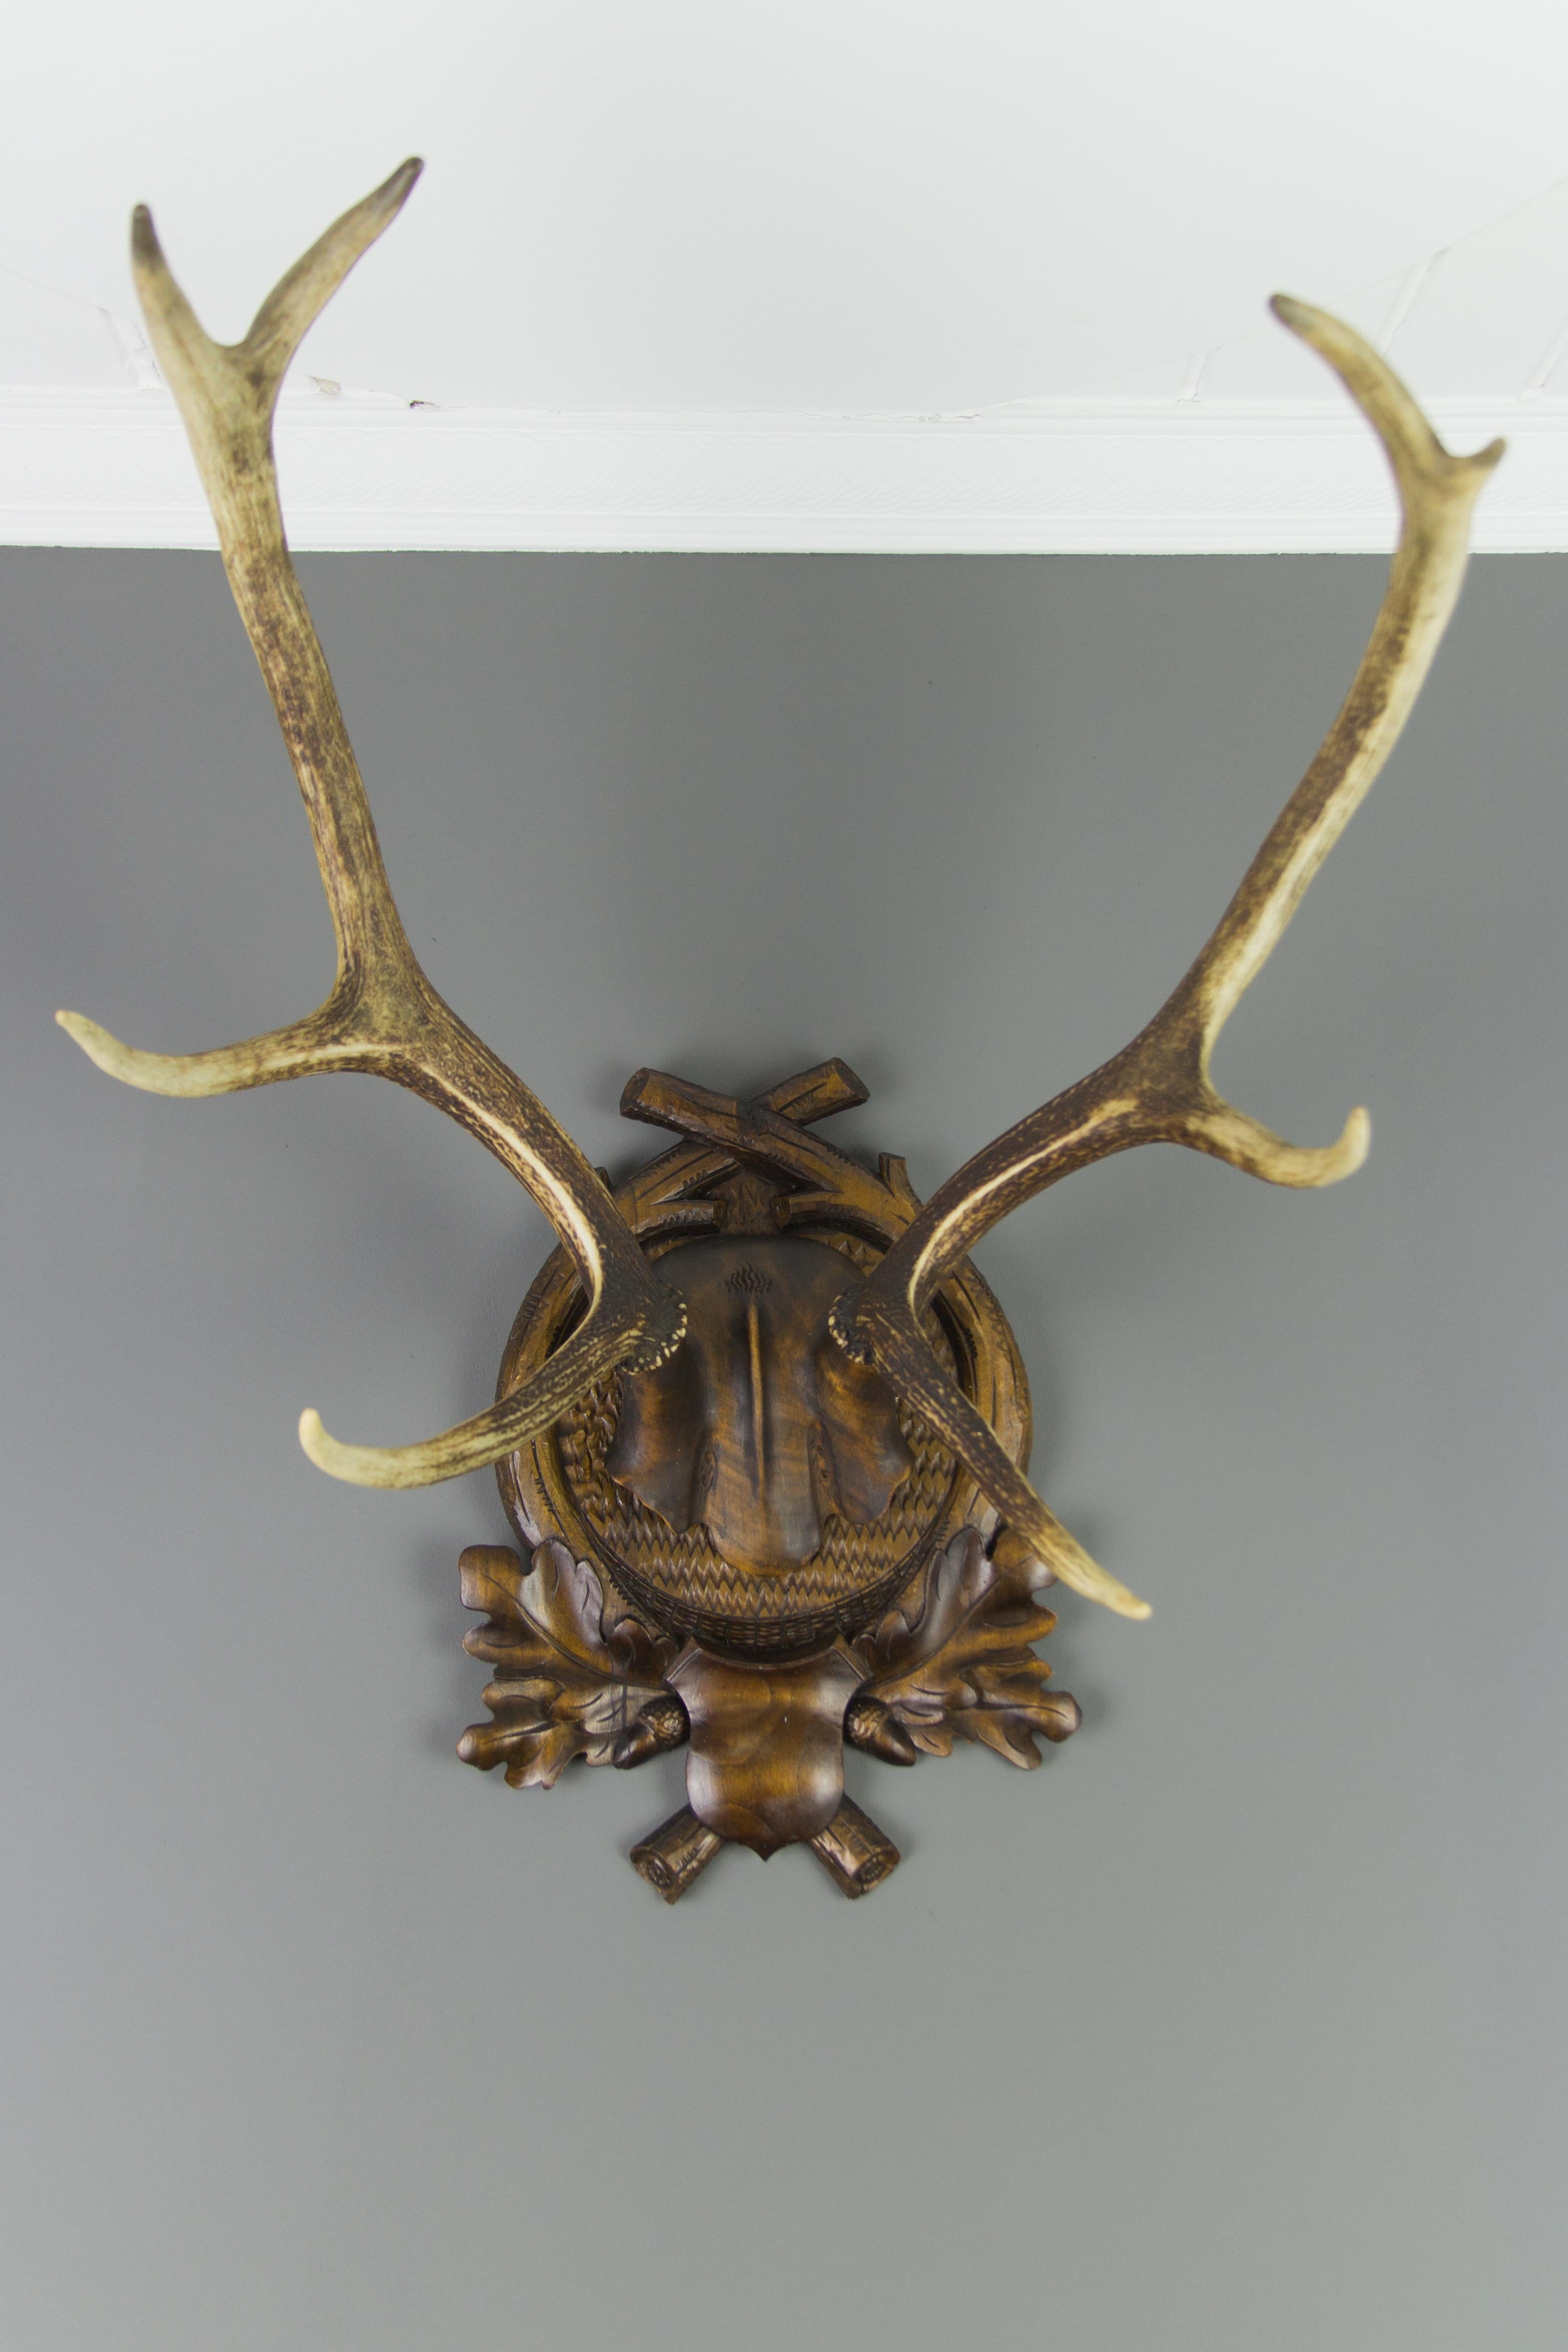 Very beautiful woodcarving with eight-point antlers from the late 19th century, the Black Forest region, Germany. Masterfully carved stylized deer skull on a trophy board ornate with oak leaves and acorns.
Dimensions circa: height 62 cm / 24.4 in,